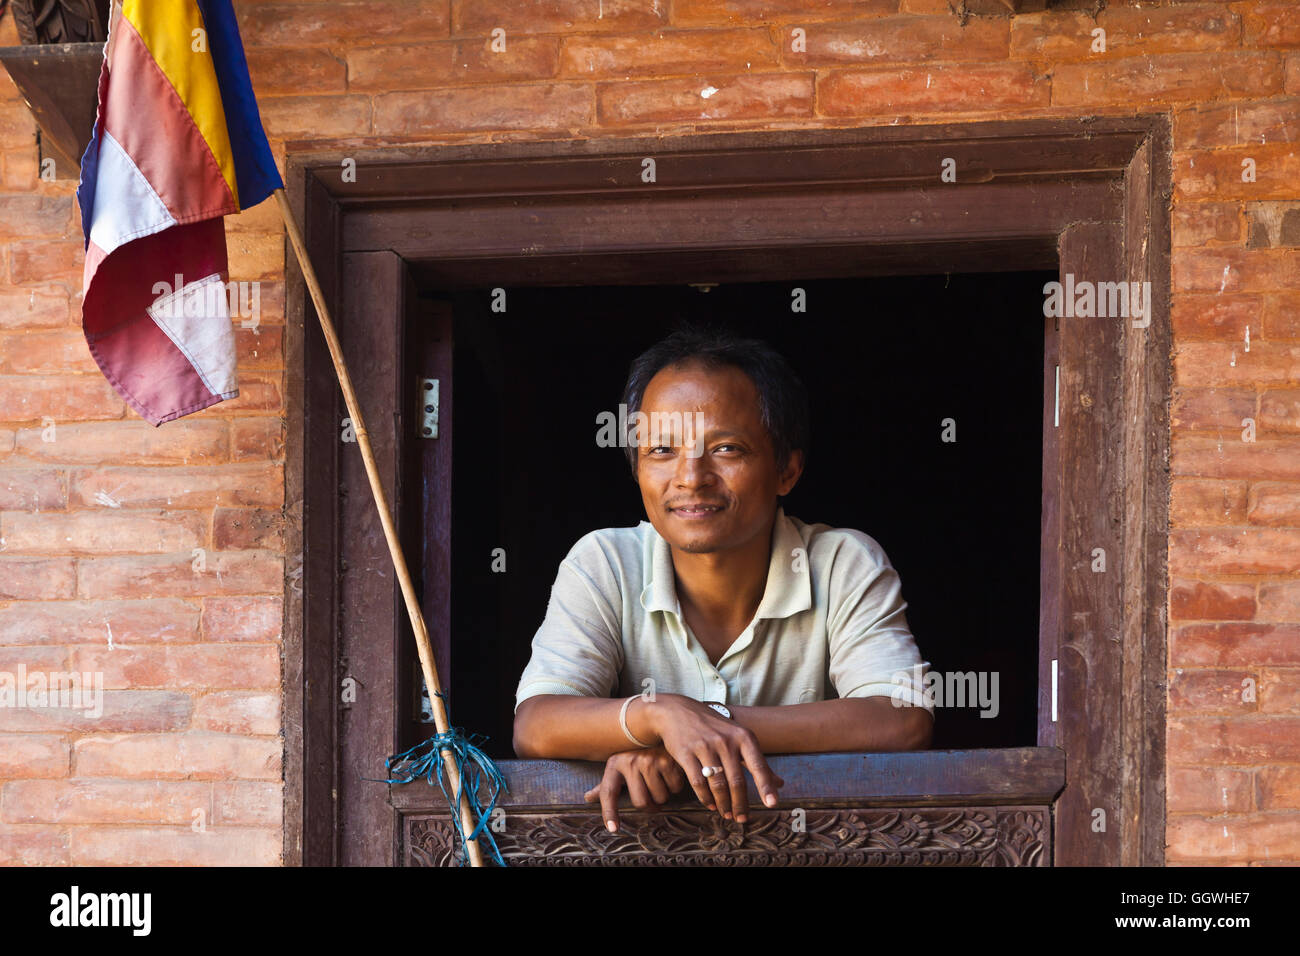 Man in a window in BHAKTAPUR which was severely damaged by the 2015 earthquake - NEPAL Stock Photo